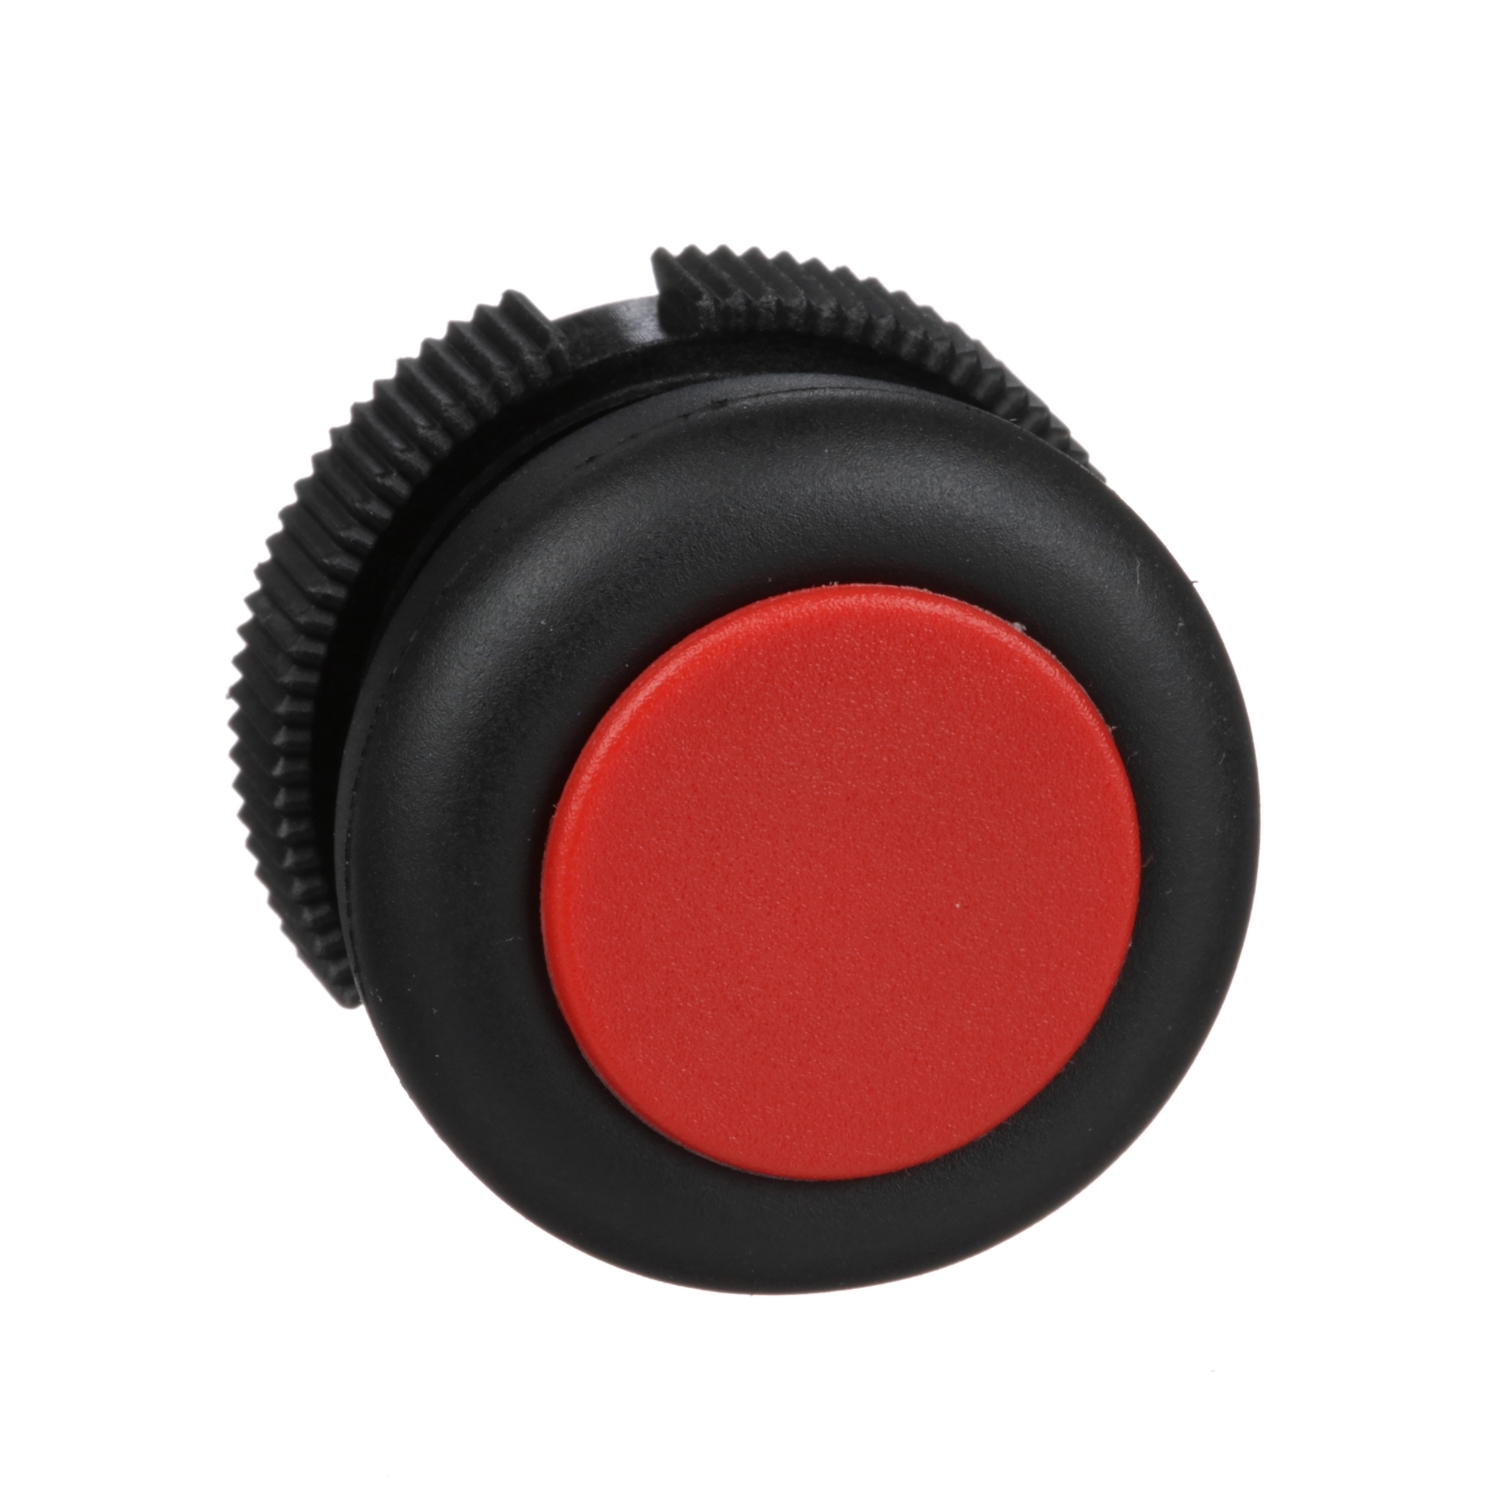 Push button head, Harmony XAC, plastic, red, booted, spring return